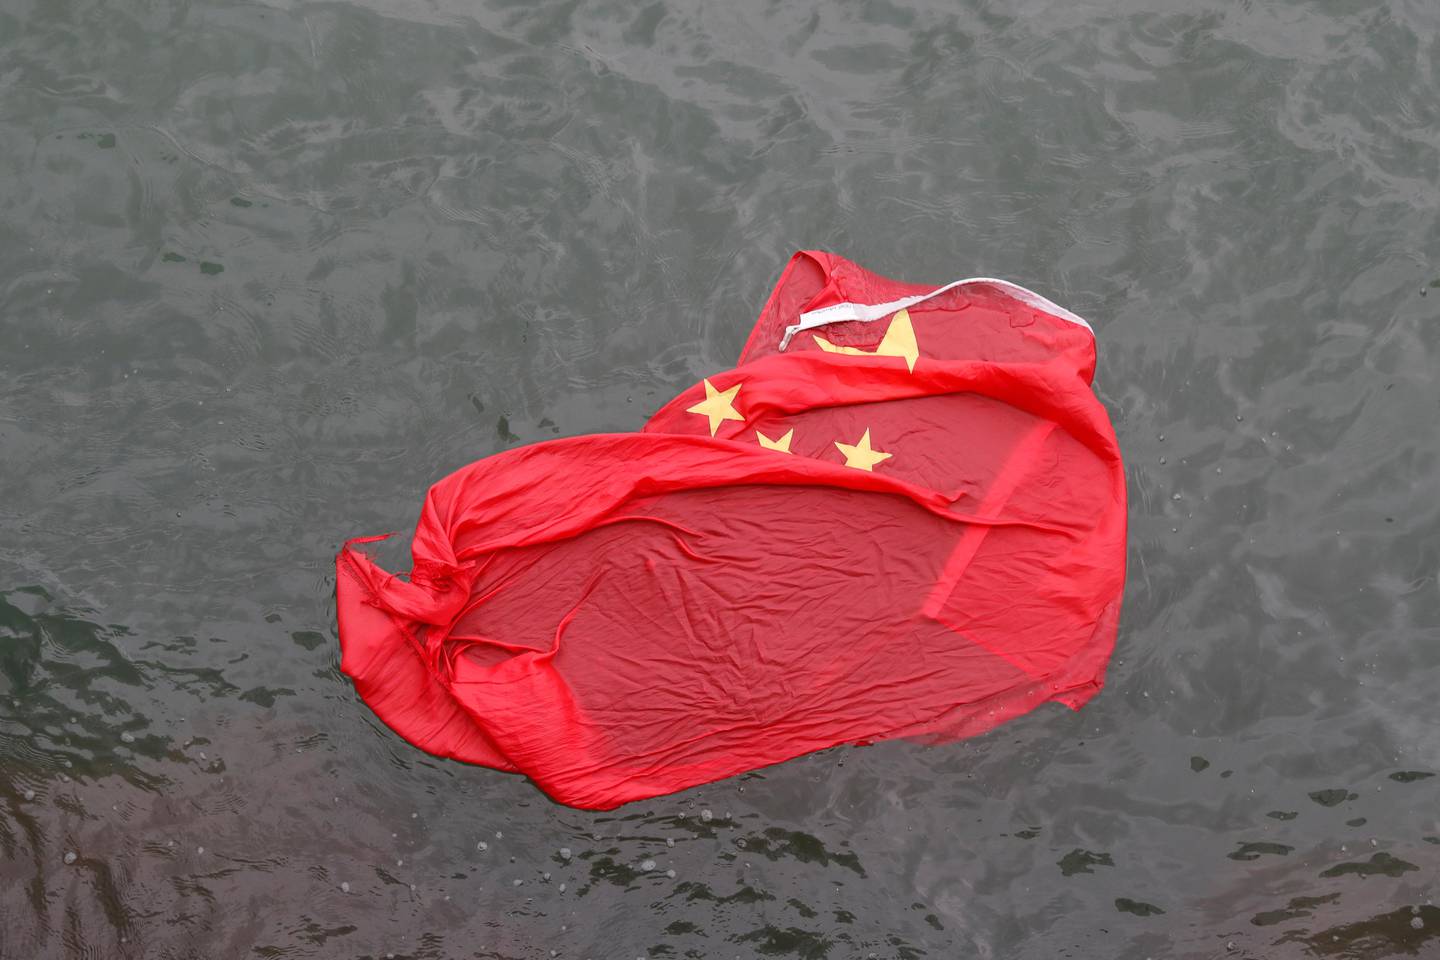 A Chinese flag floats on the surface it was thrown in the water by protesters during a demonstration in Hong Kong, Saturday, Aug. 3, 2019. Hong Kong protesters ignored police warnings and streamed past the designated endpoint for a rally Saturday in the latest of a series of demonstrations targeting the government of the semi-autonomous Chinese territory. (AP Photo/Vincent Thian)